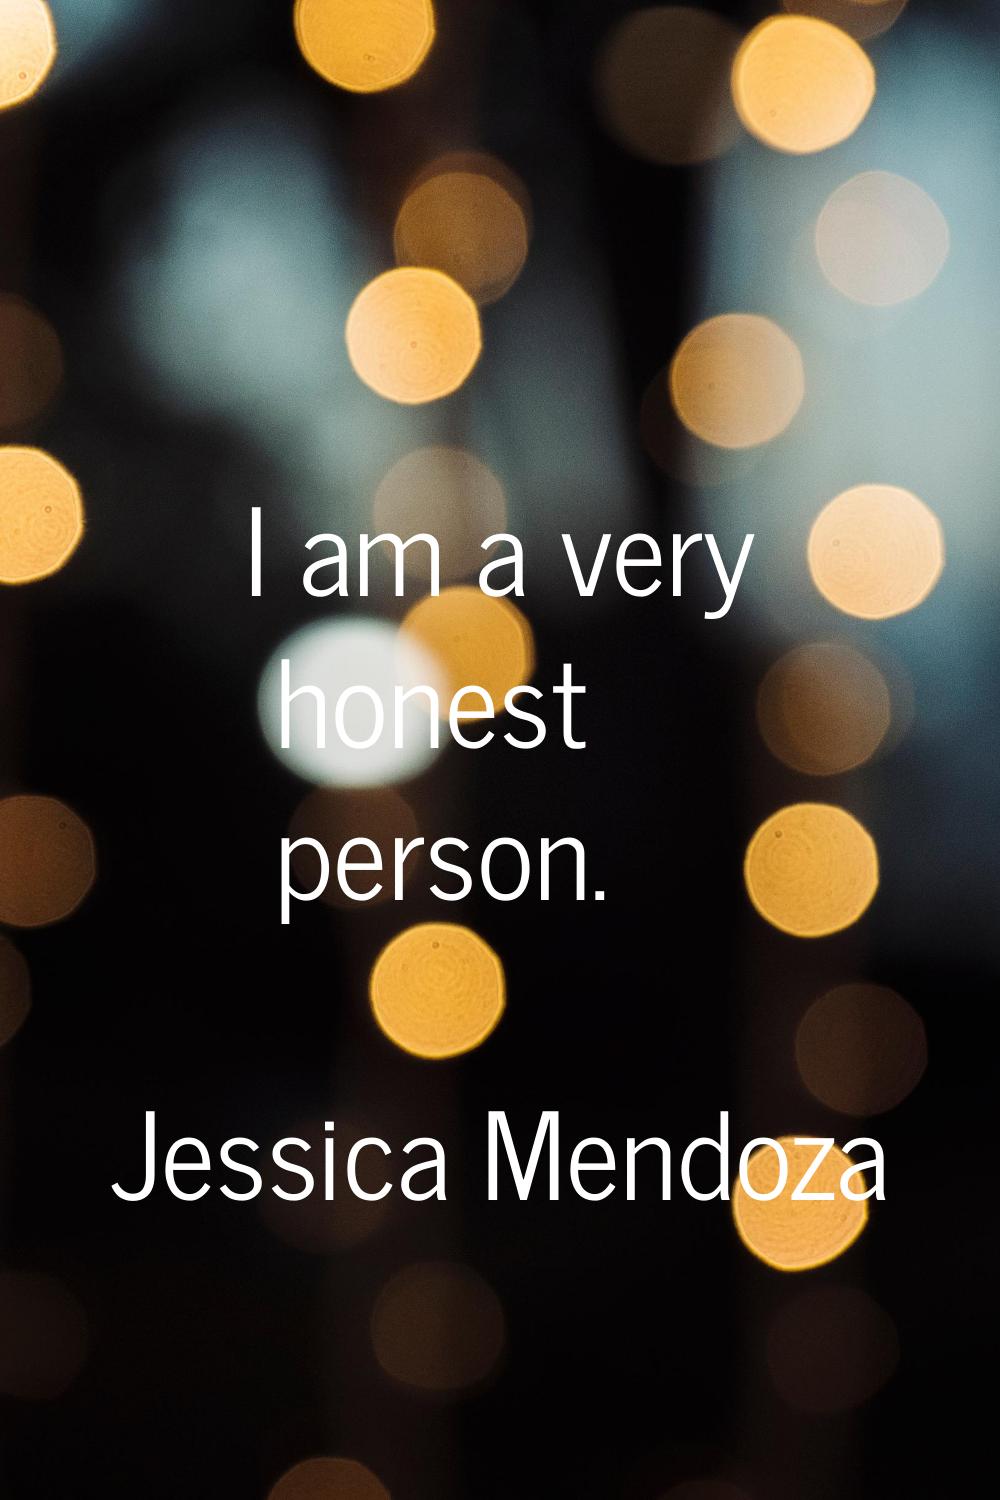 I am a very honest person.